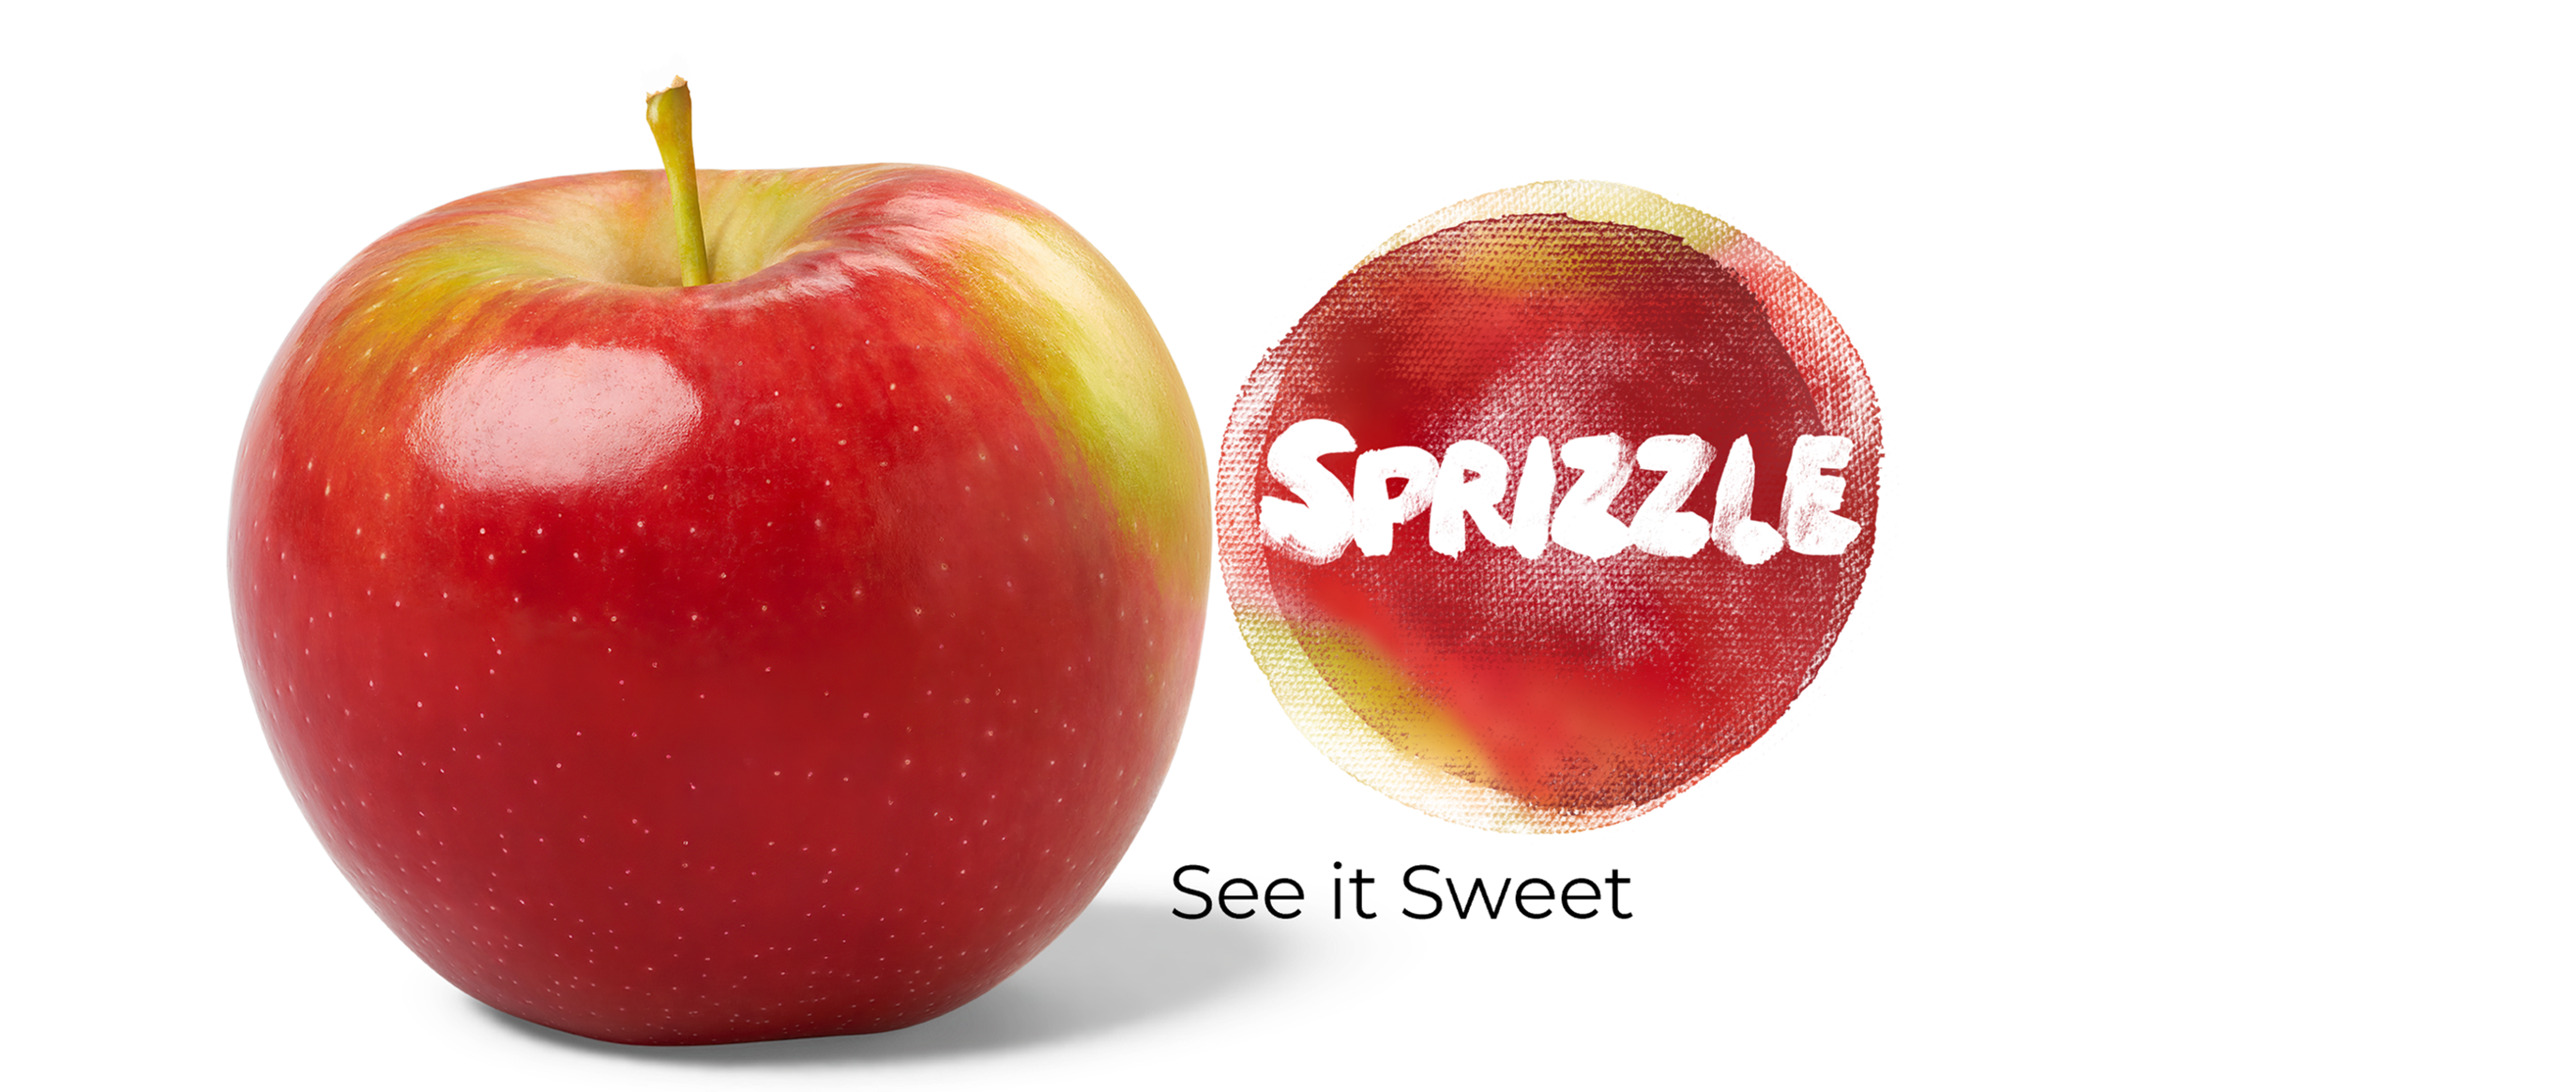 New brand concept "Sprizzle®" launched: The optimistic apple that redefines the taste experience